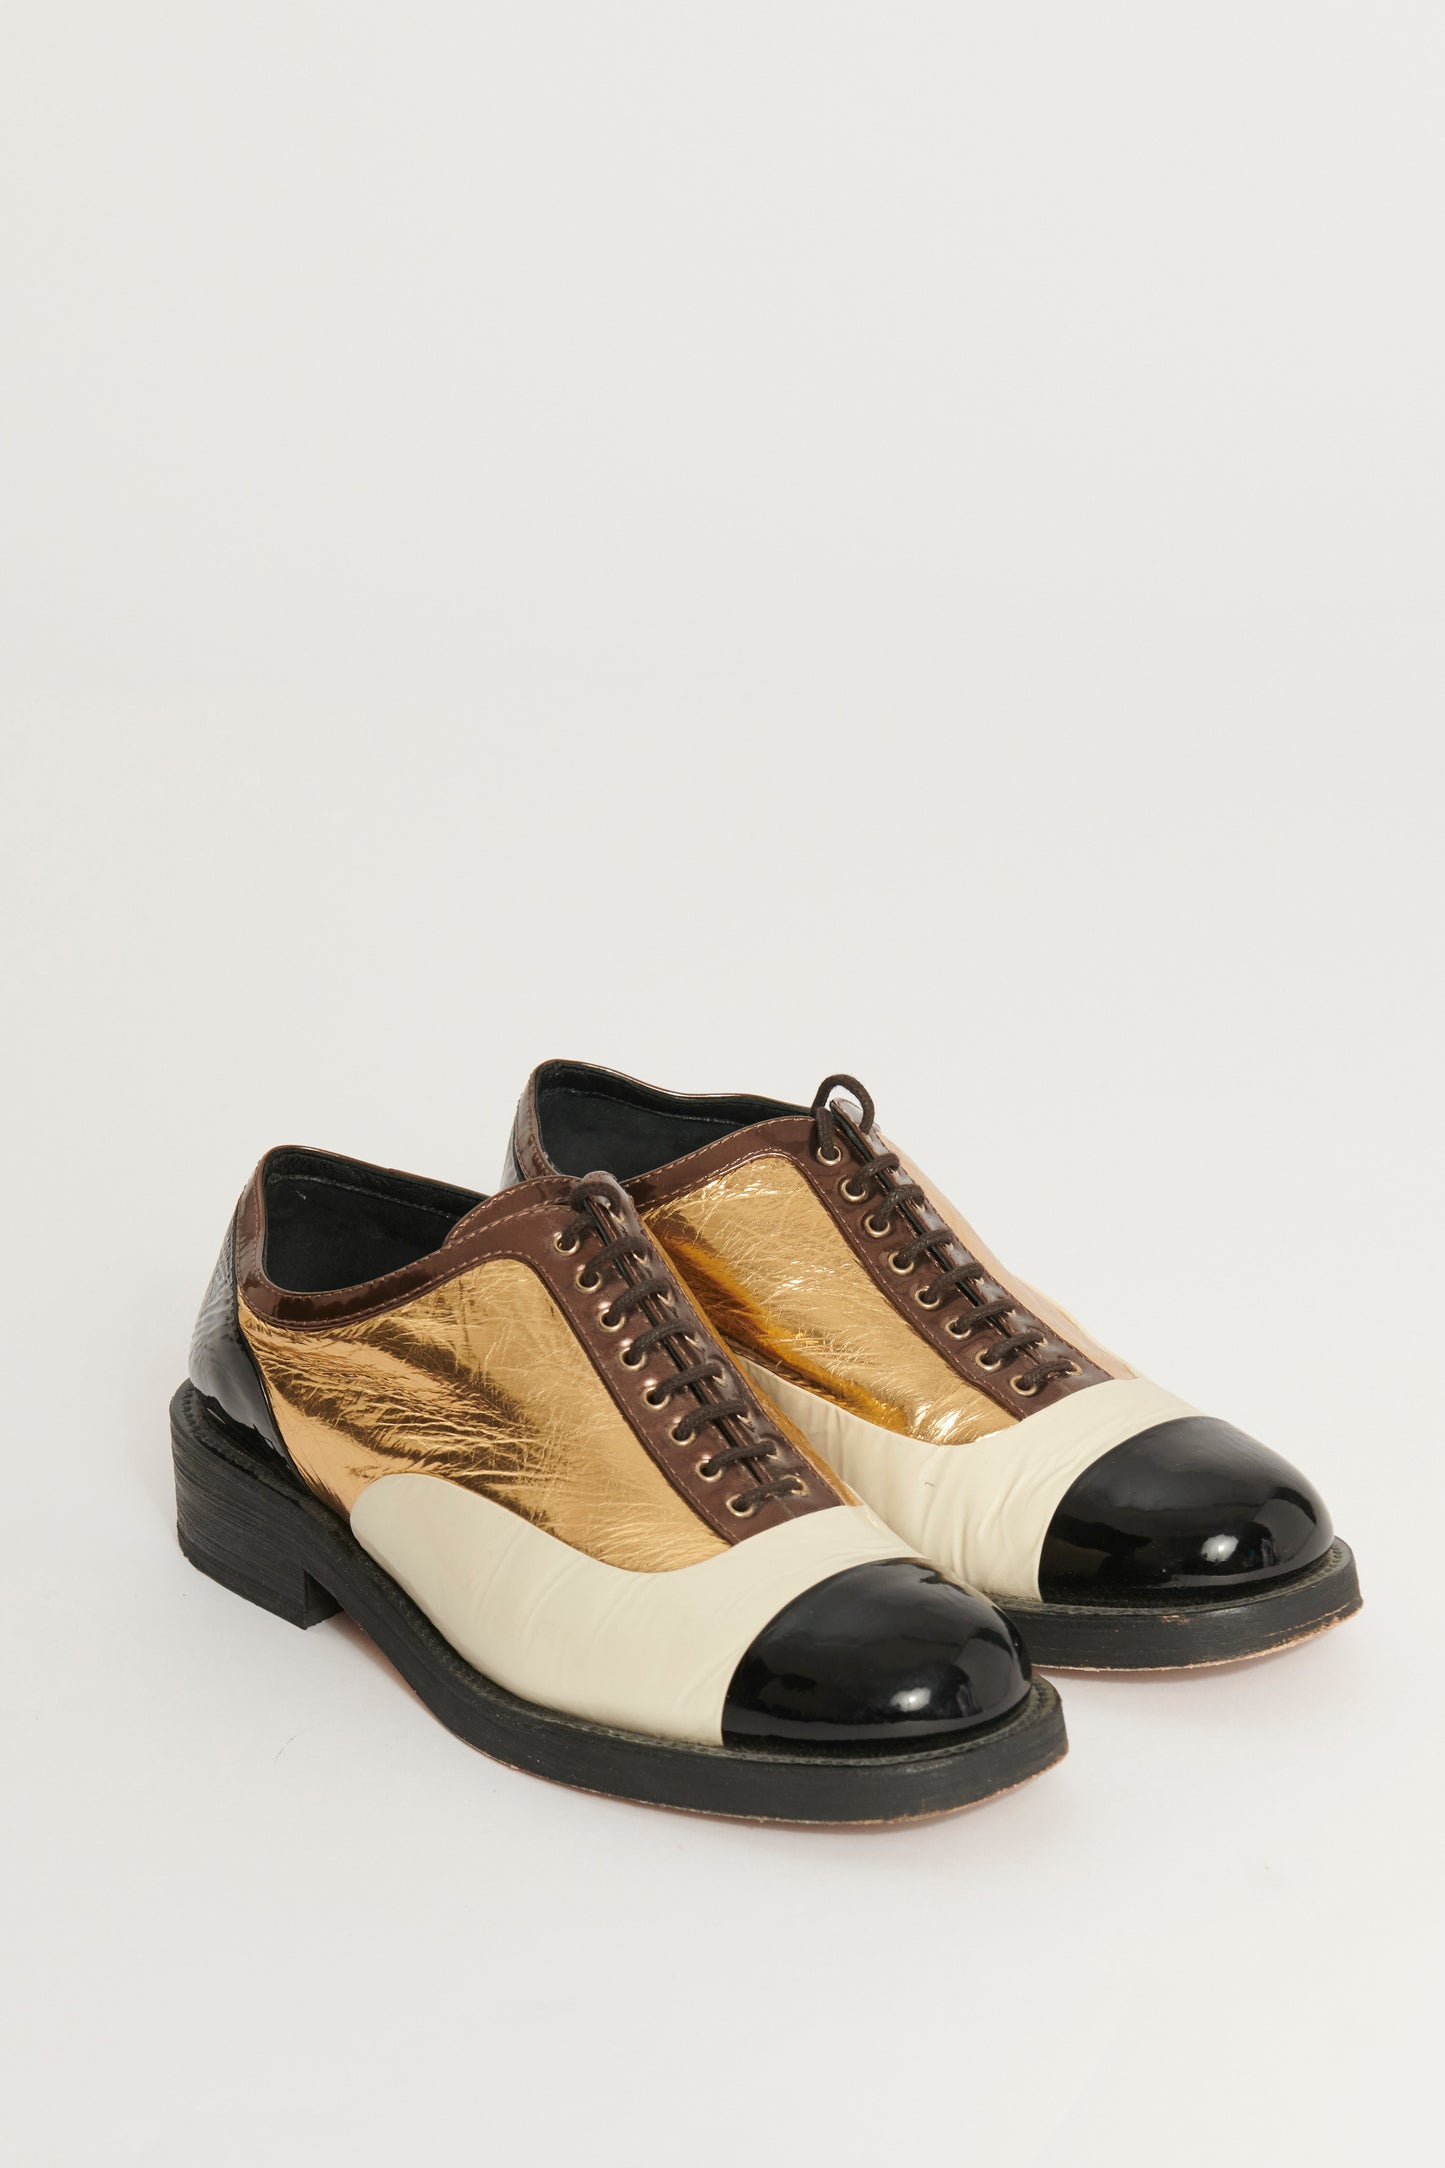 Contrast Patent Leather Lace Up Preowned Brogues